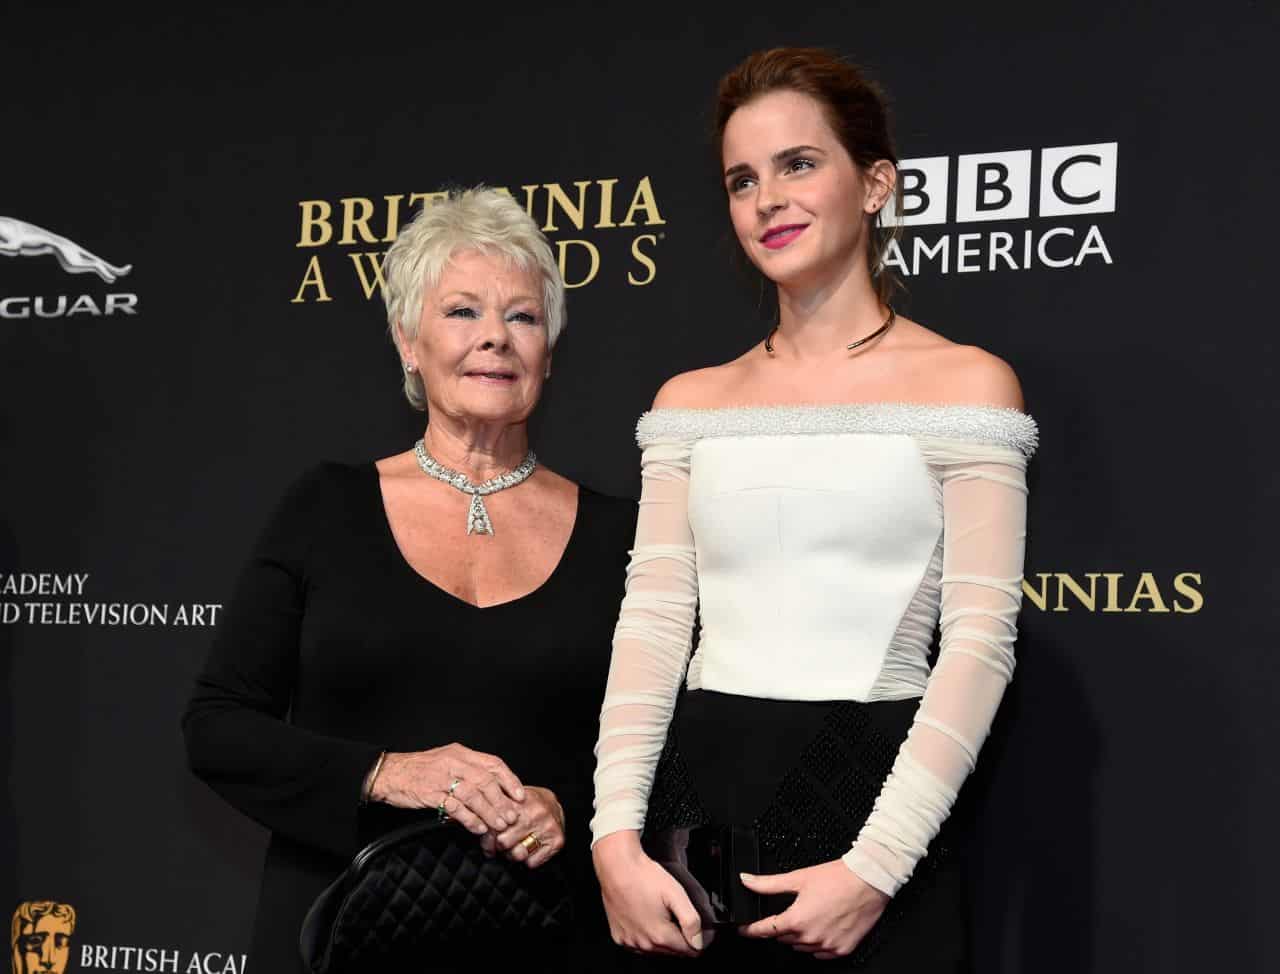 Emma Watson Sparkled in a Sheer Top and Black Pants at the Britannia Awards